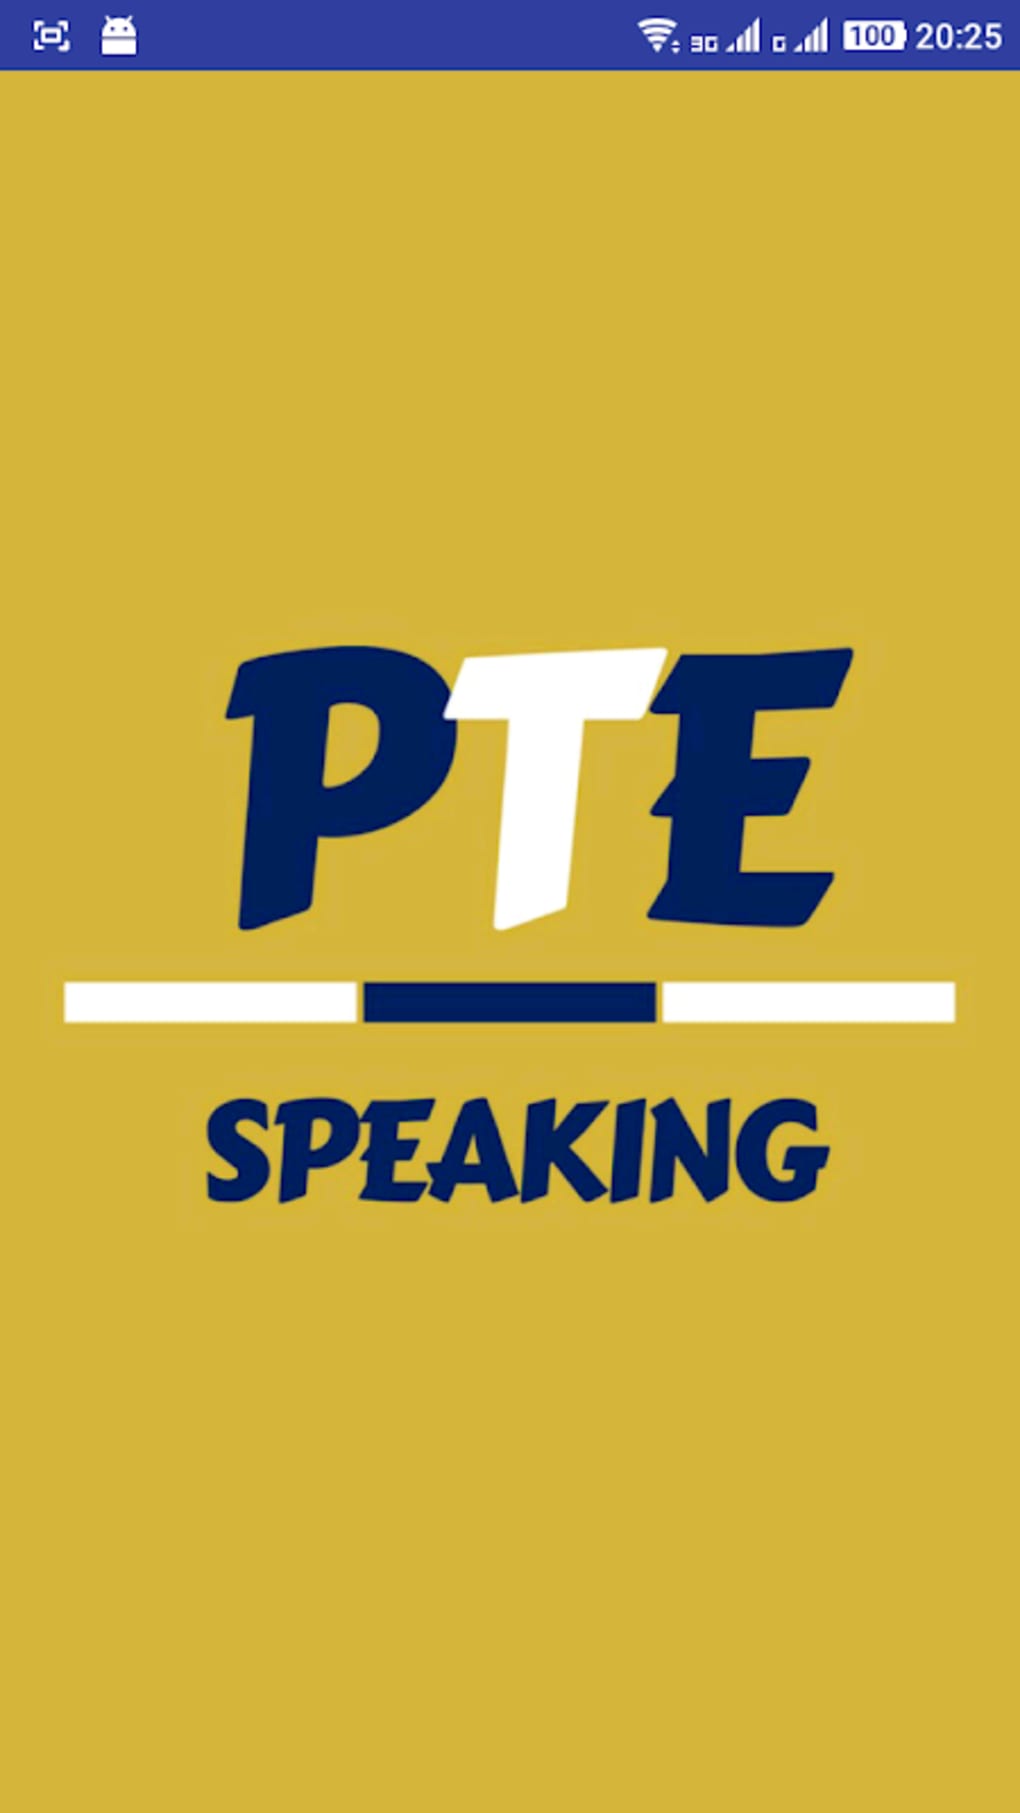 pte-speaking-practice-tests-apk-android